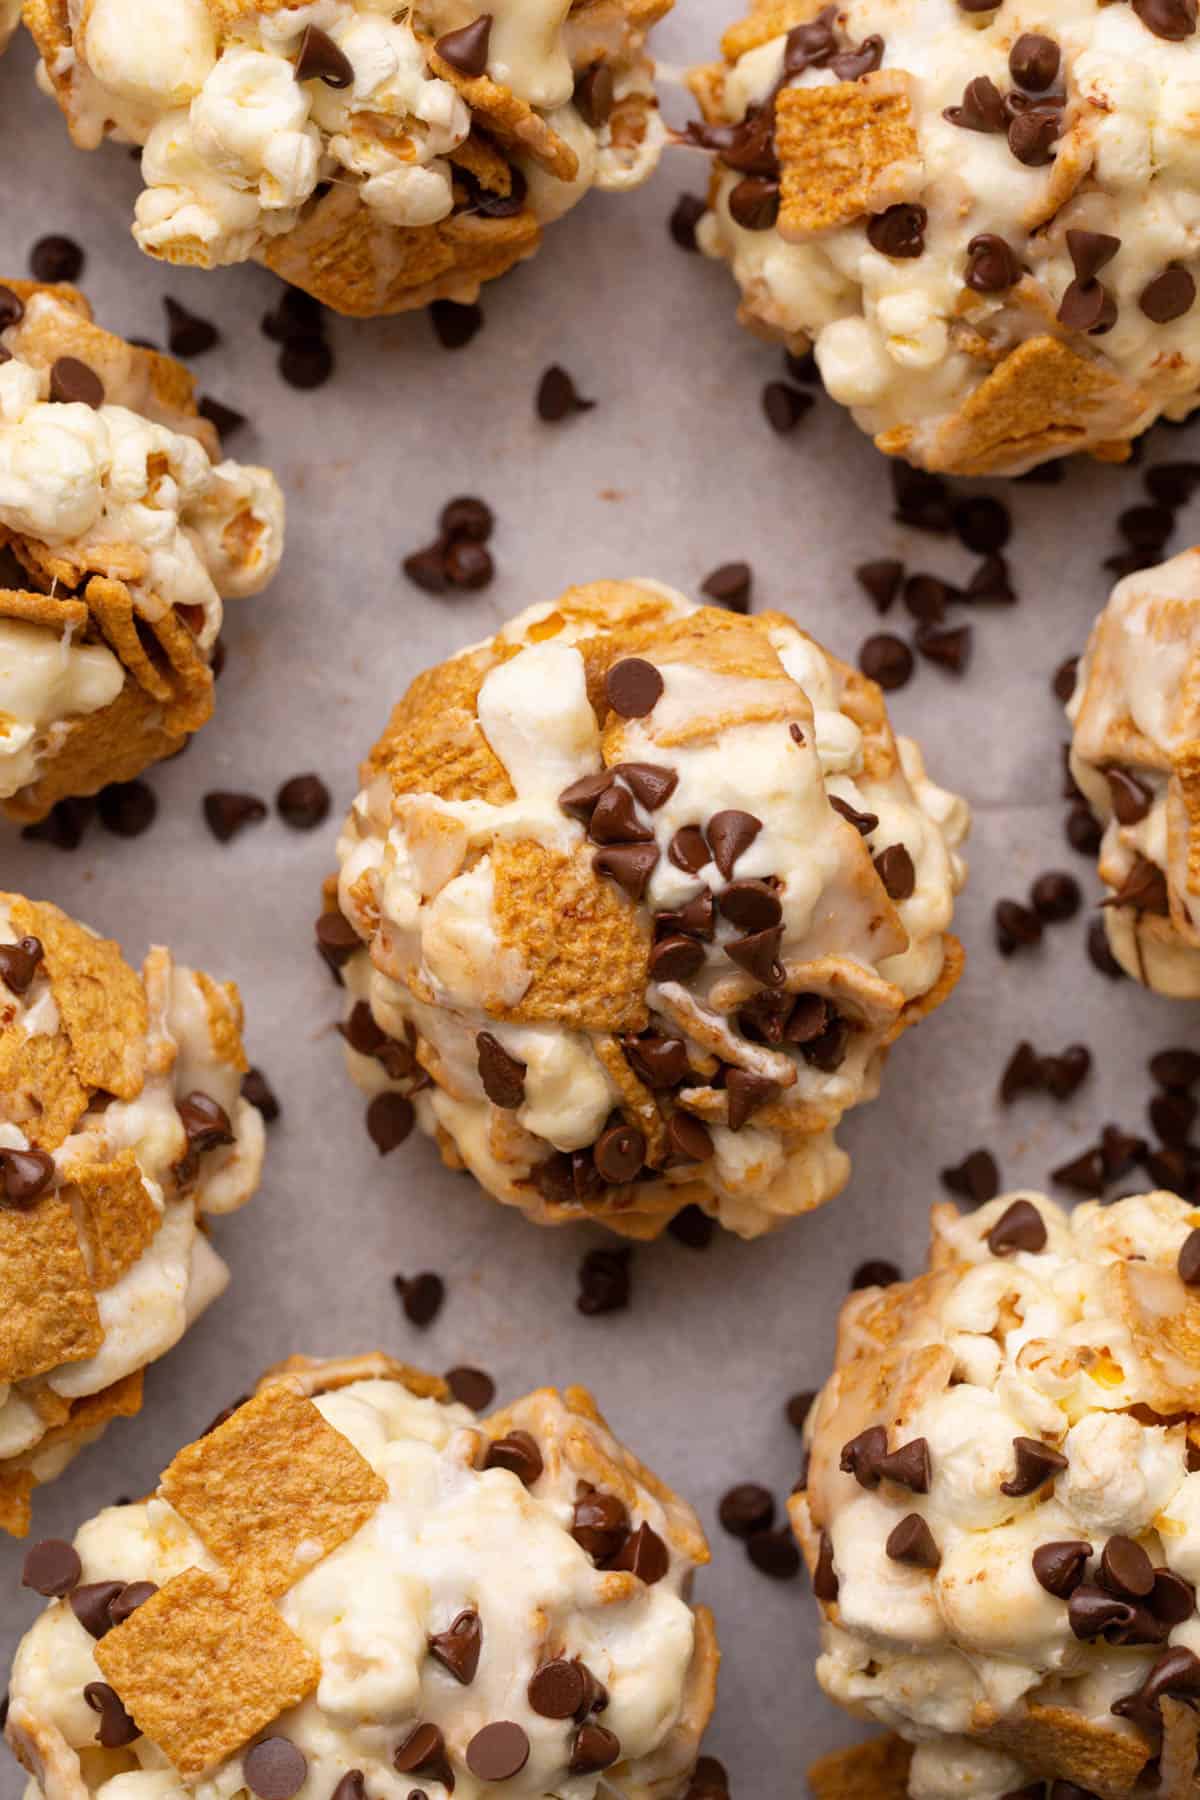 A close image of s'mores popcorn balls made with golden grahams cereal, popcorn, and mini chocolate chips.